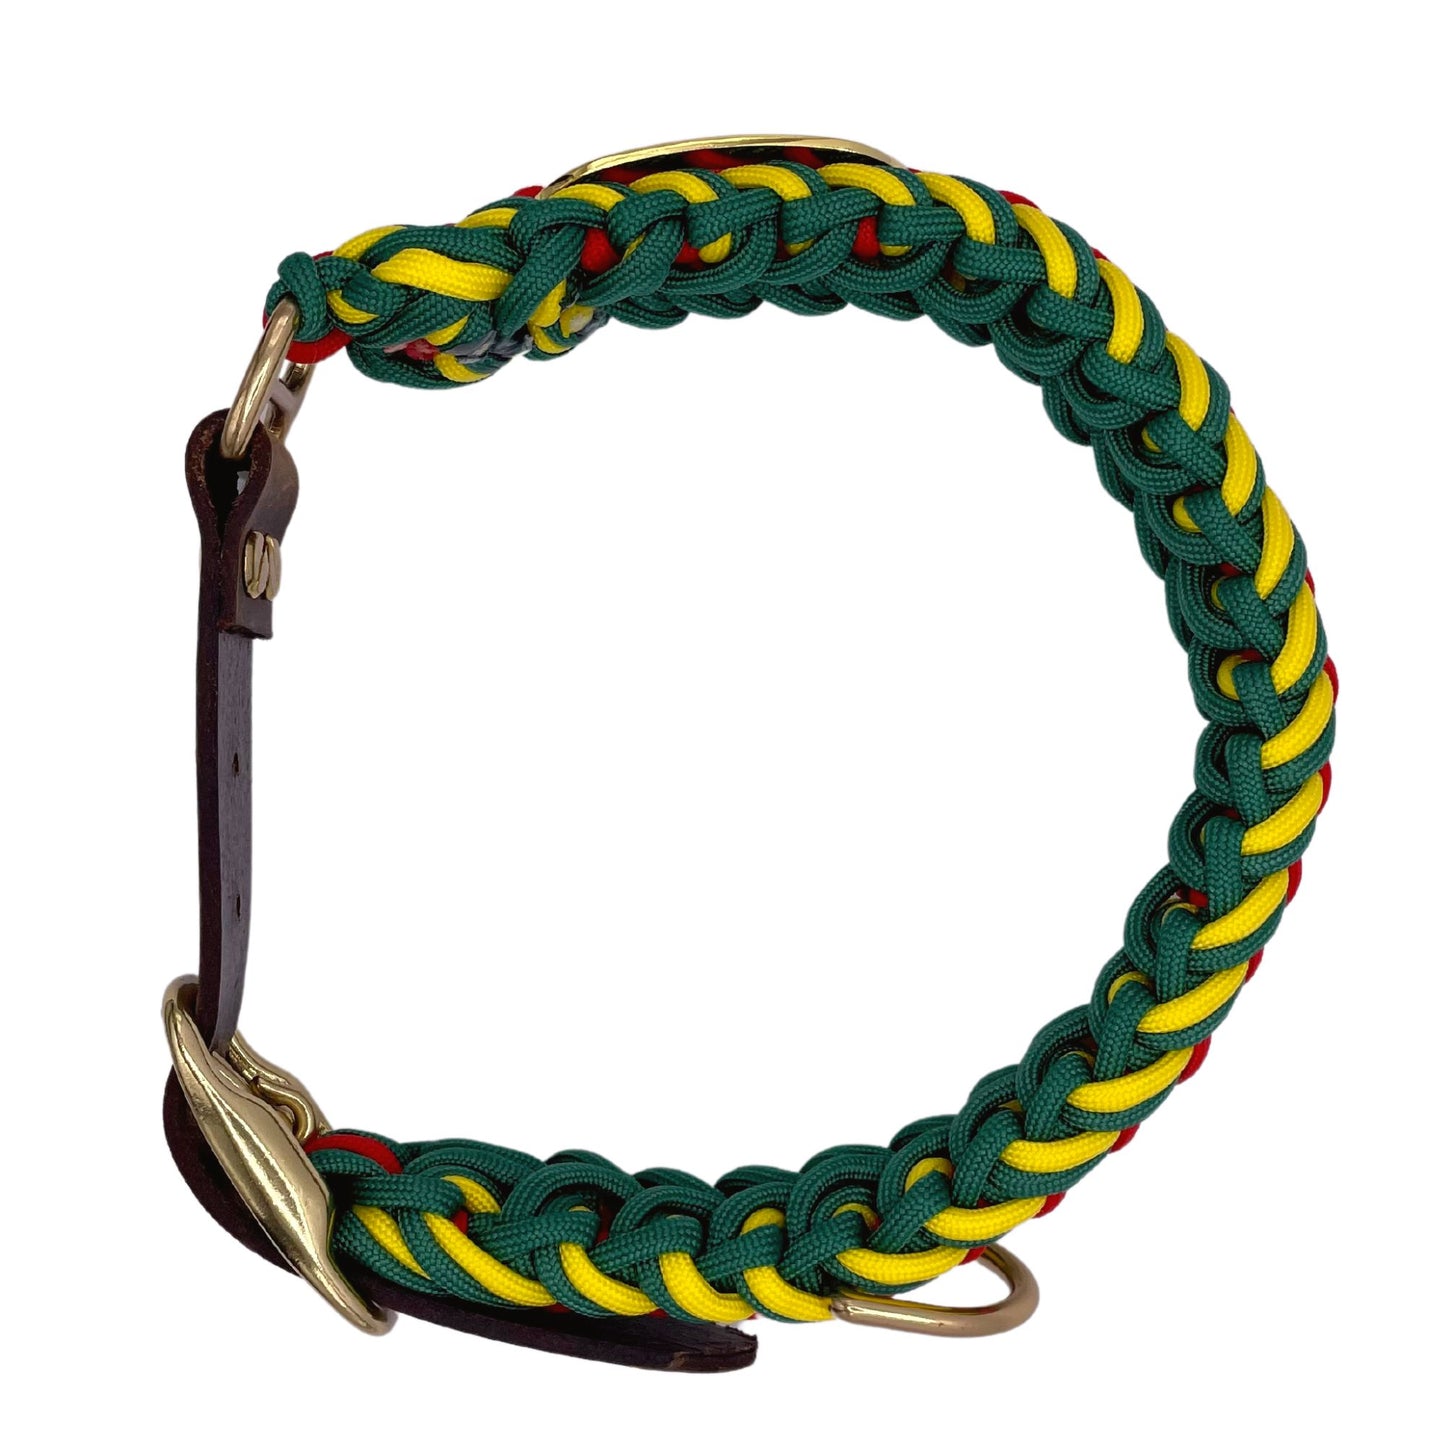 Rasta Paracord Dog Collar with Gold hardware and Leather or Biothane belt options.